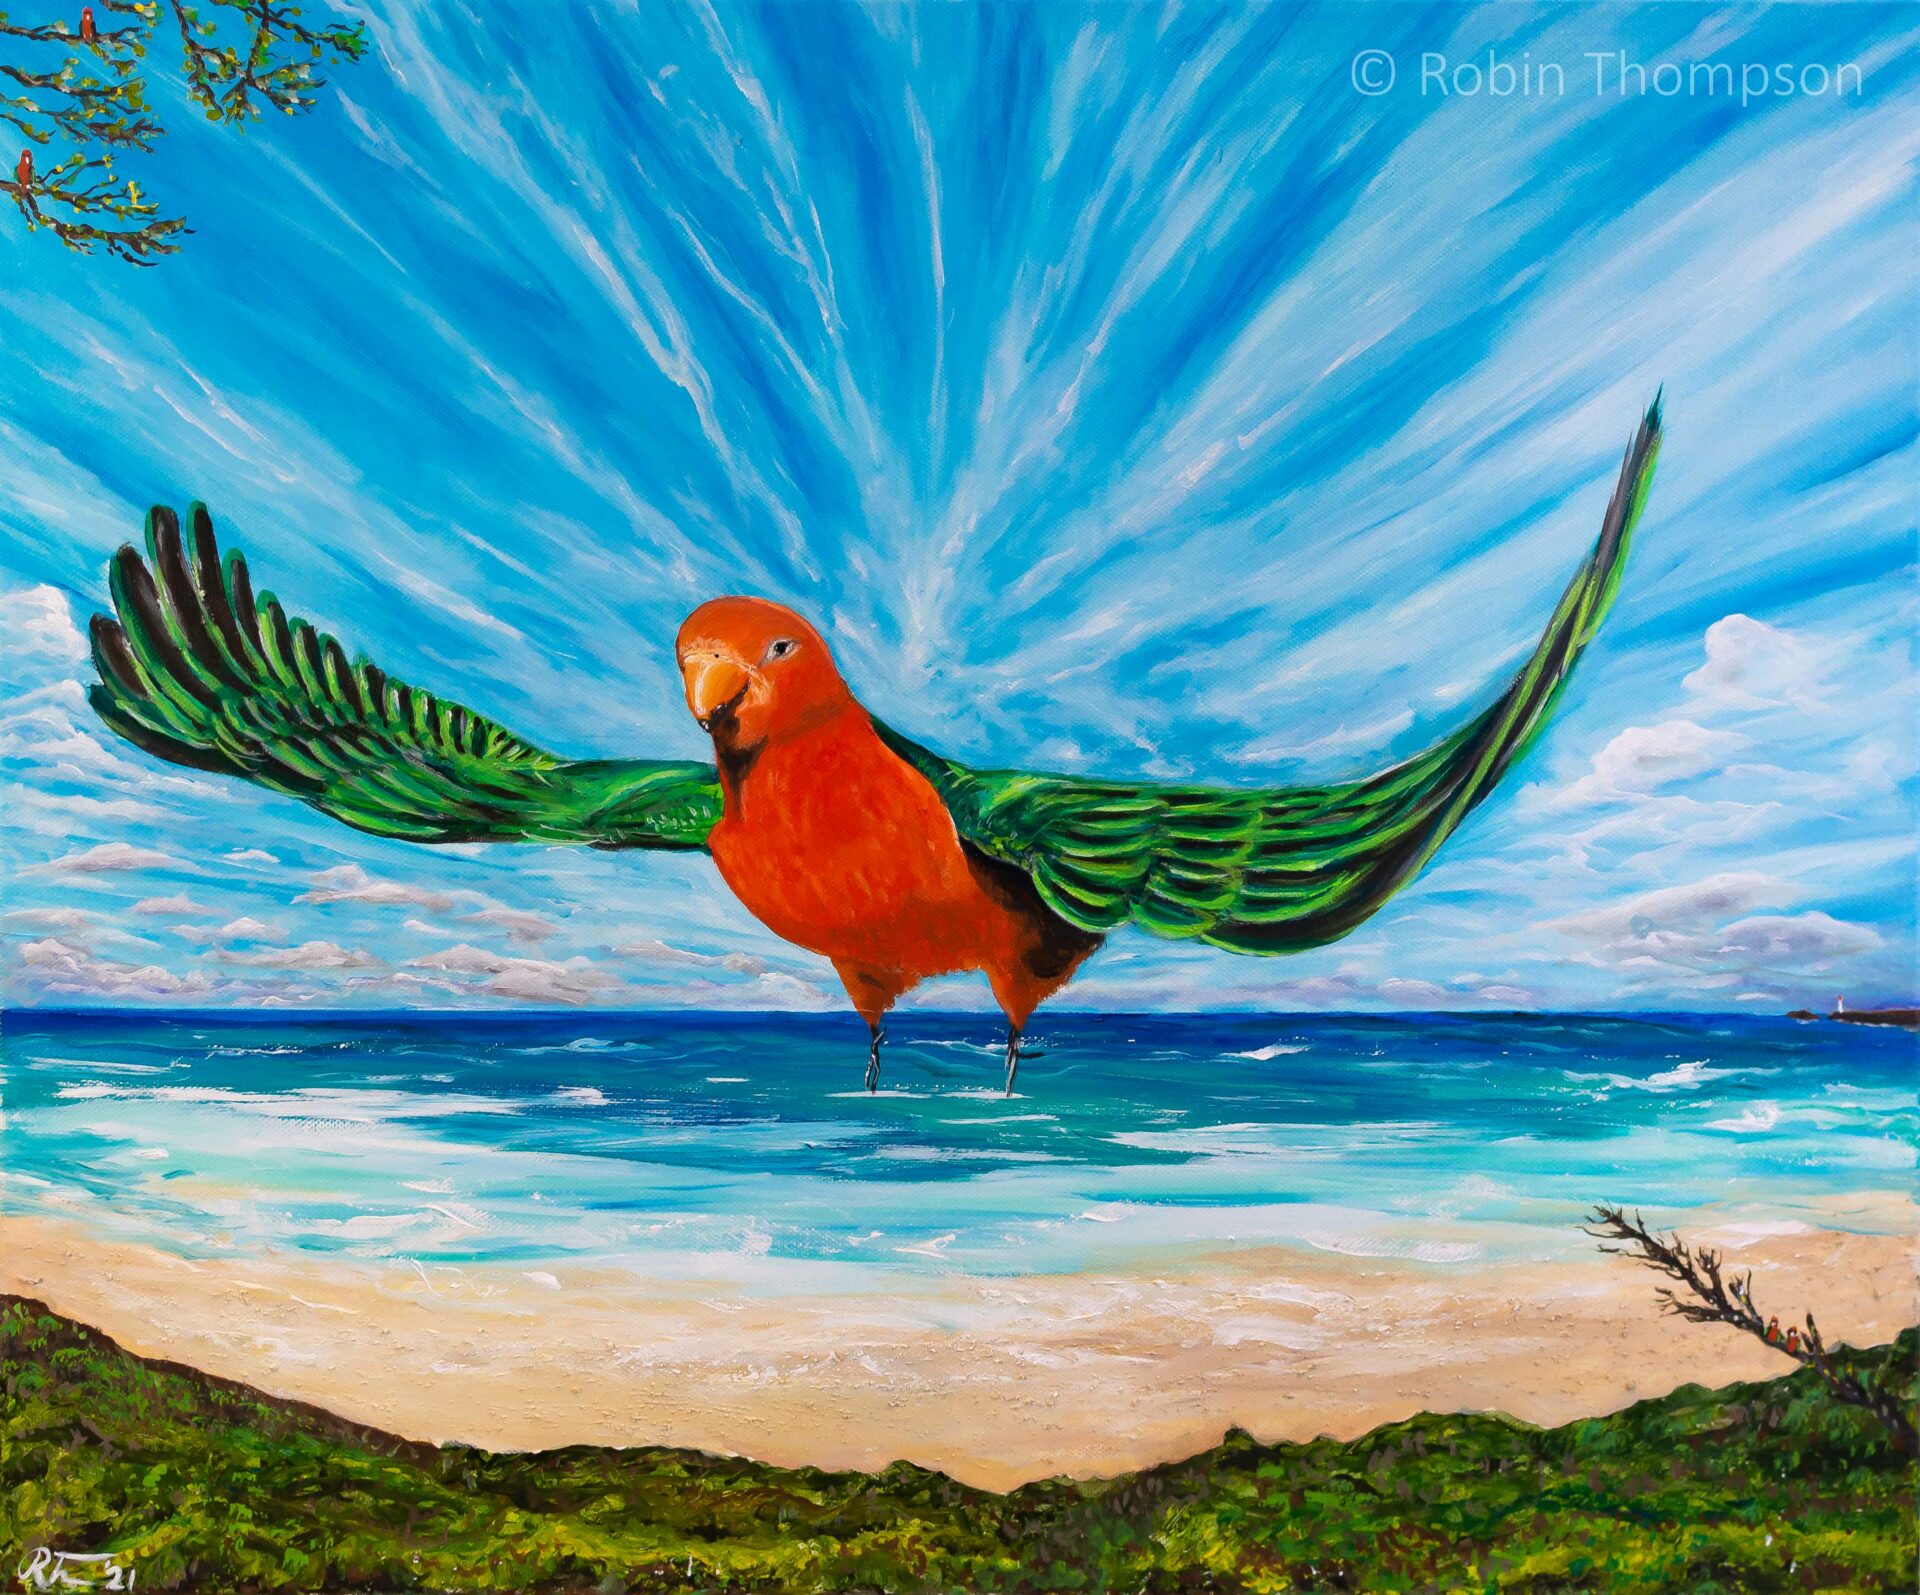 Acylic painting of a red and green Australian King Parrot bird flying over a large beach landscape. Dramatic clouds and white sandy beaches emphasise the scene and the figure of the parrot in the centre of the painting.